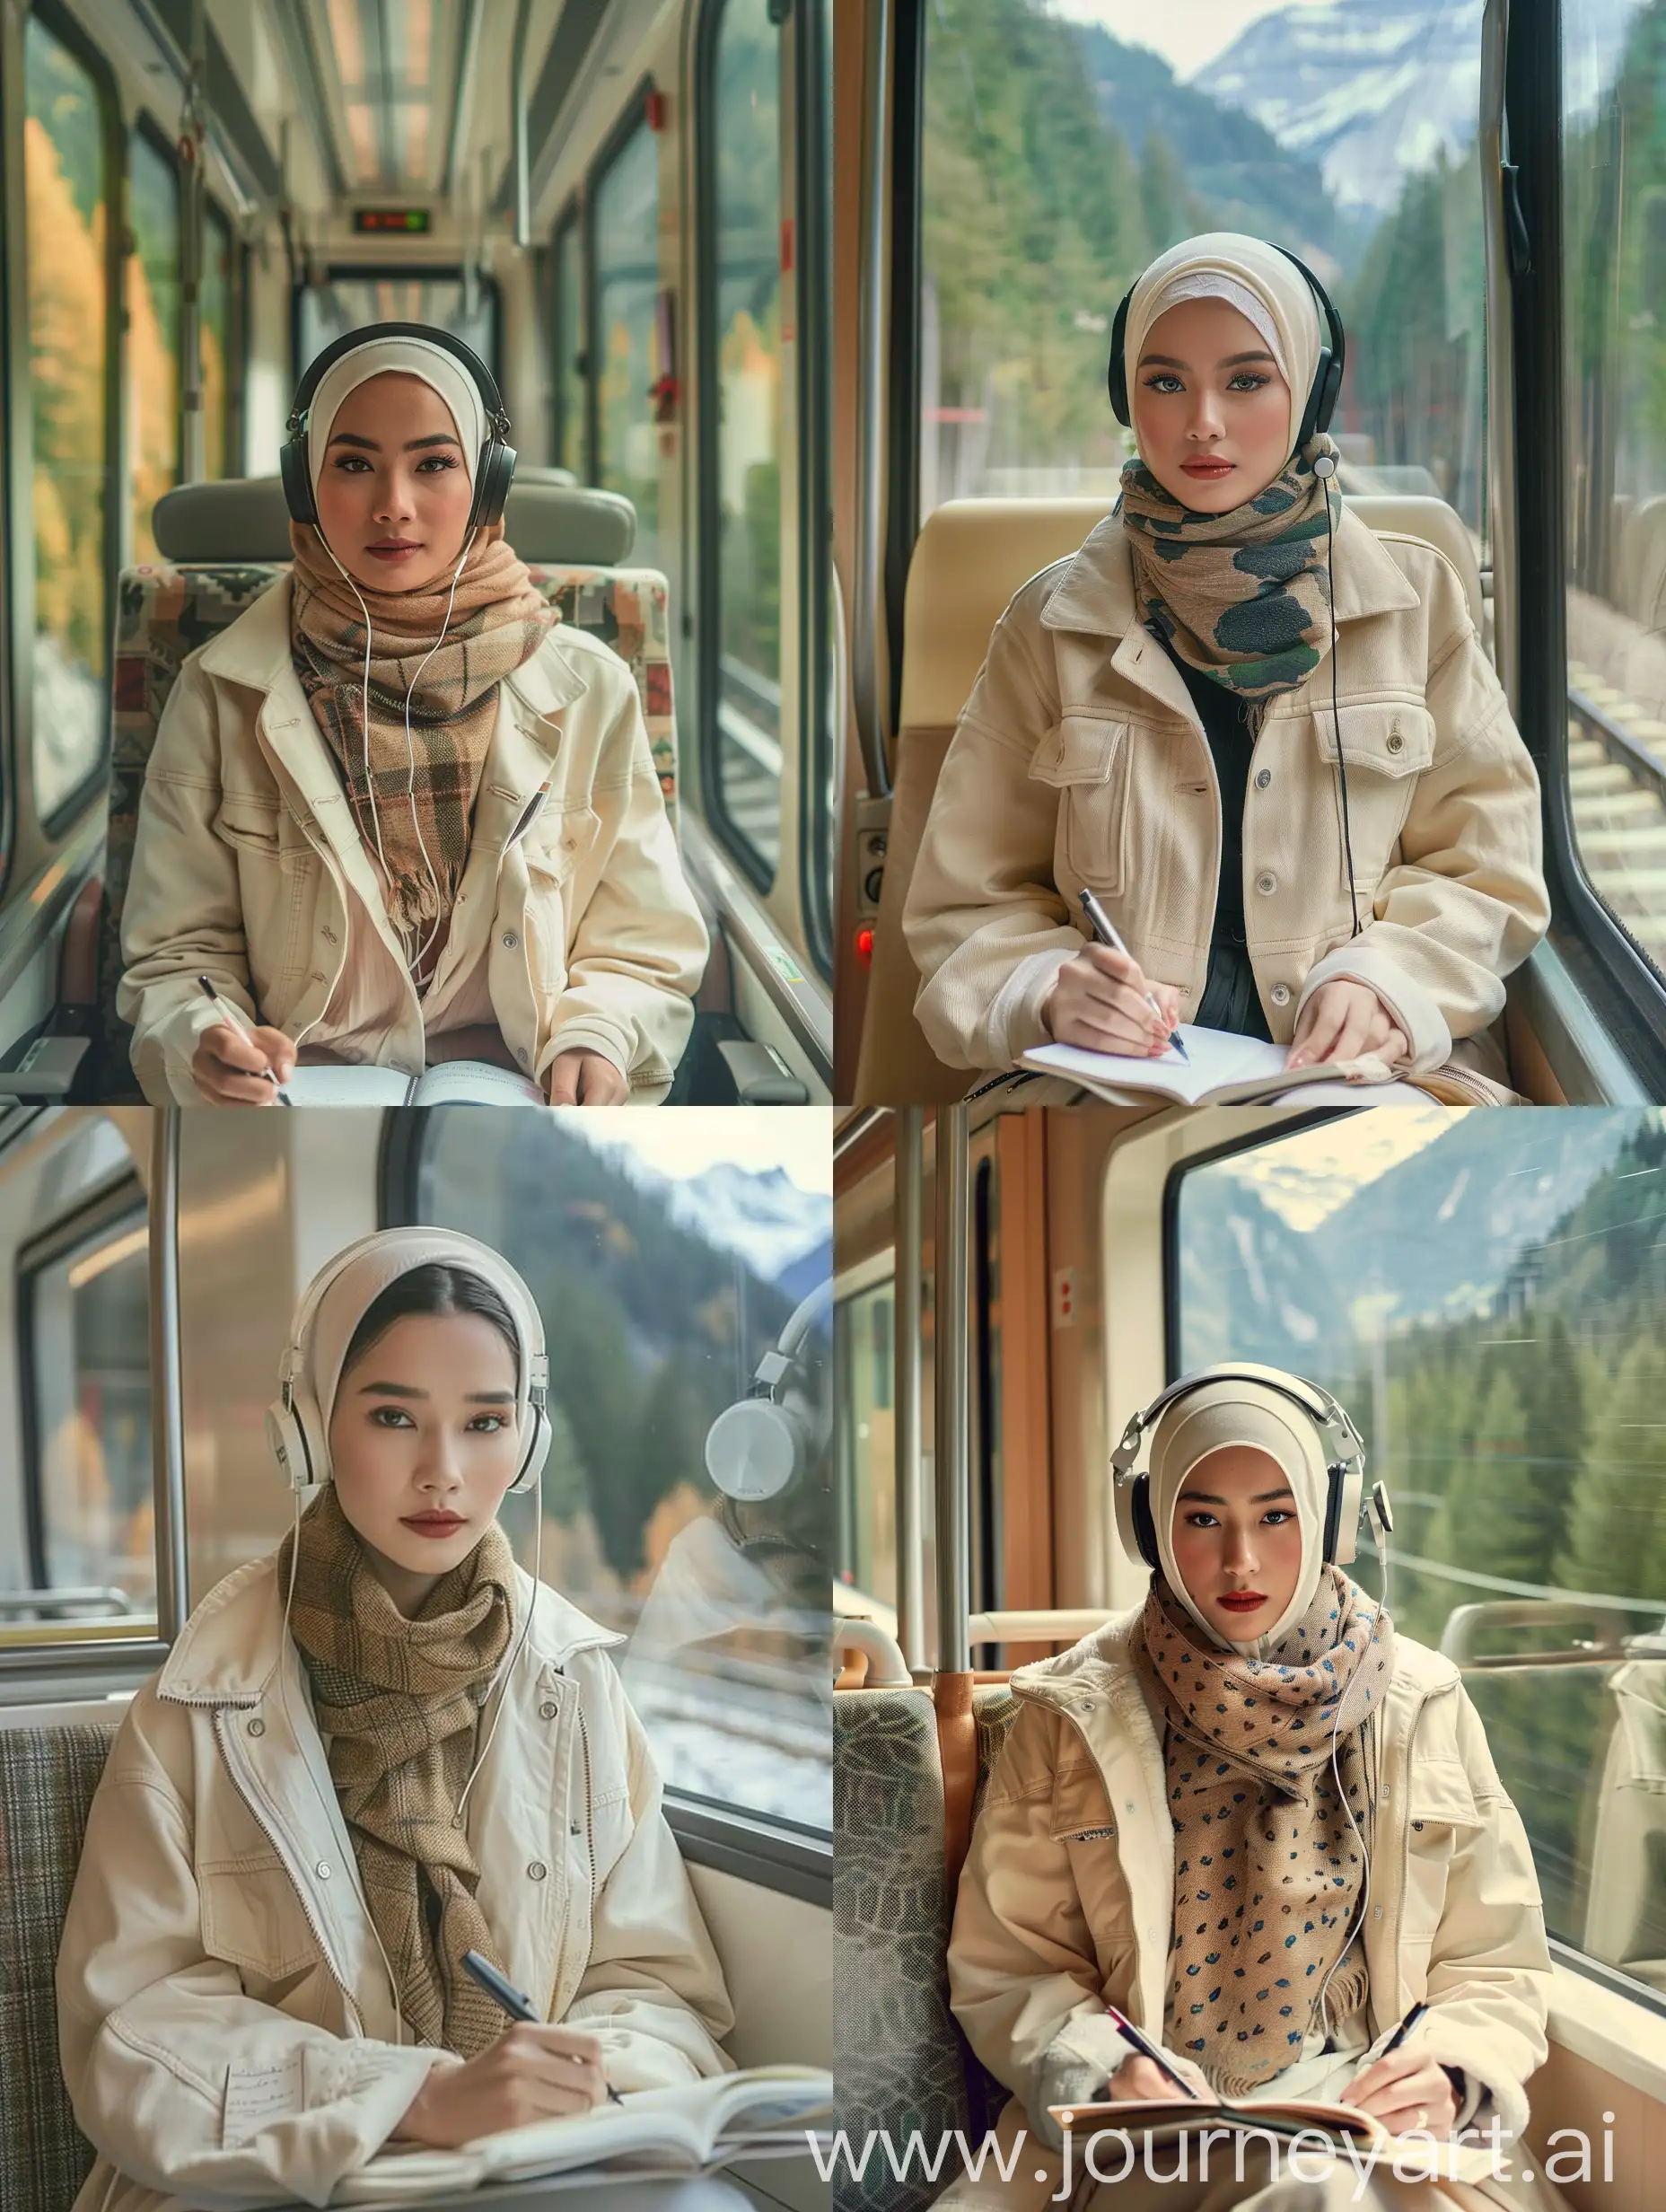 Thai-Woman-in-Cream-Trucker-Jacket-and-Hijab-Writing-Journal-on-Train